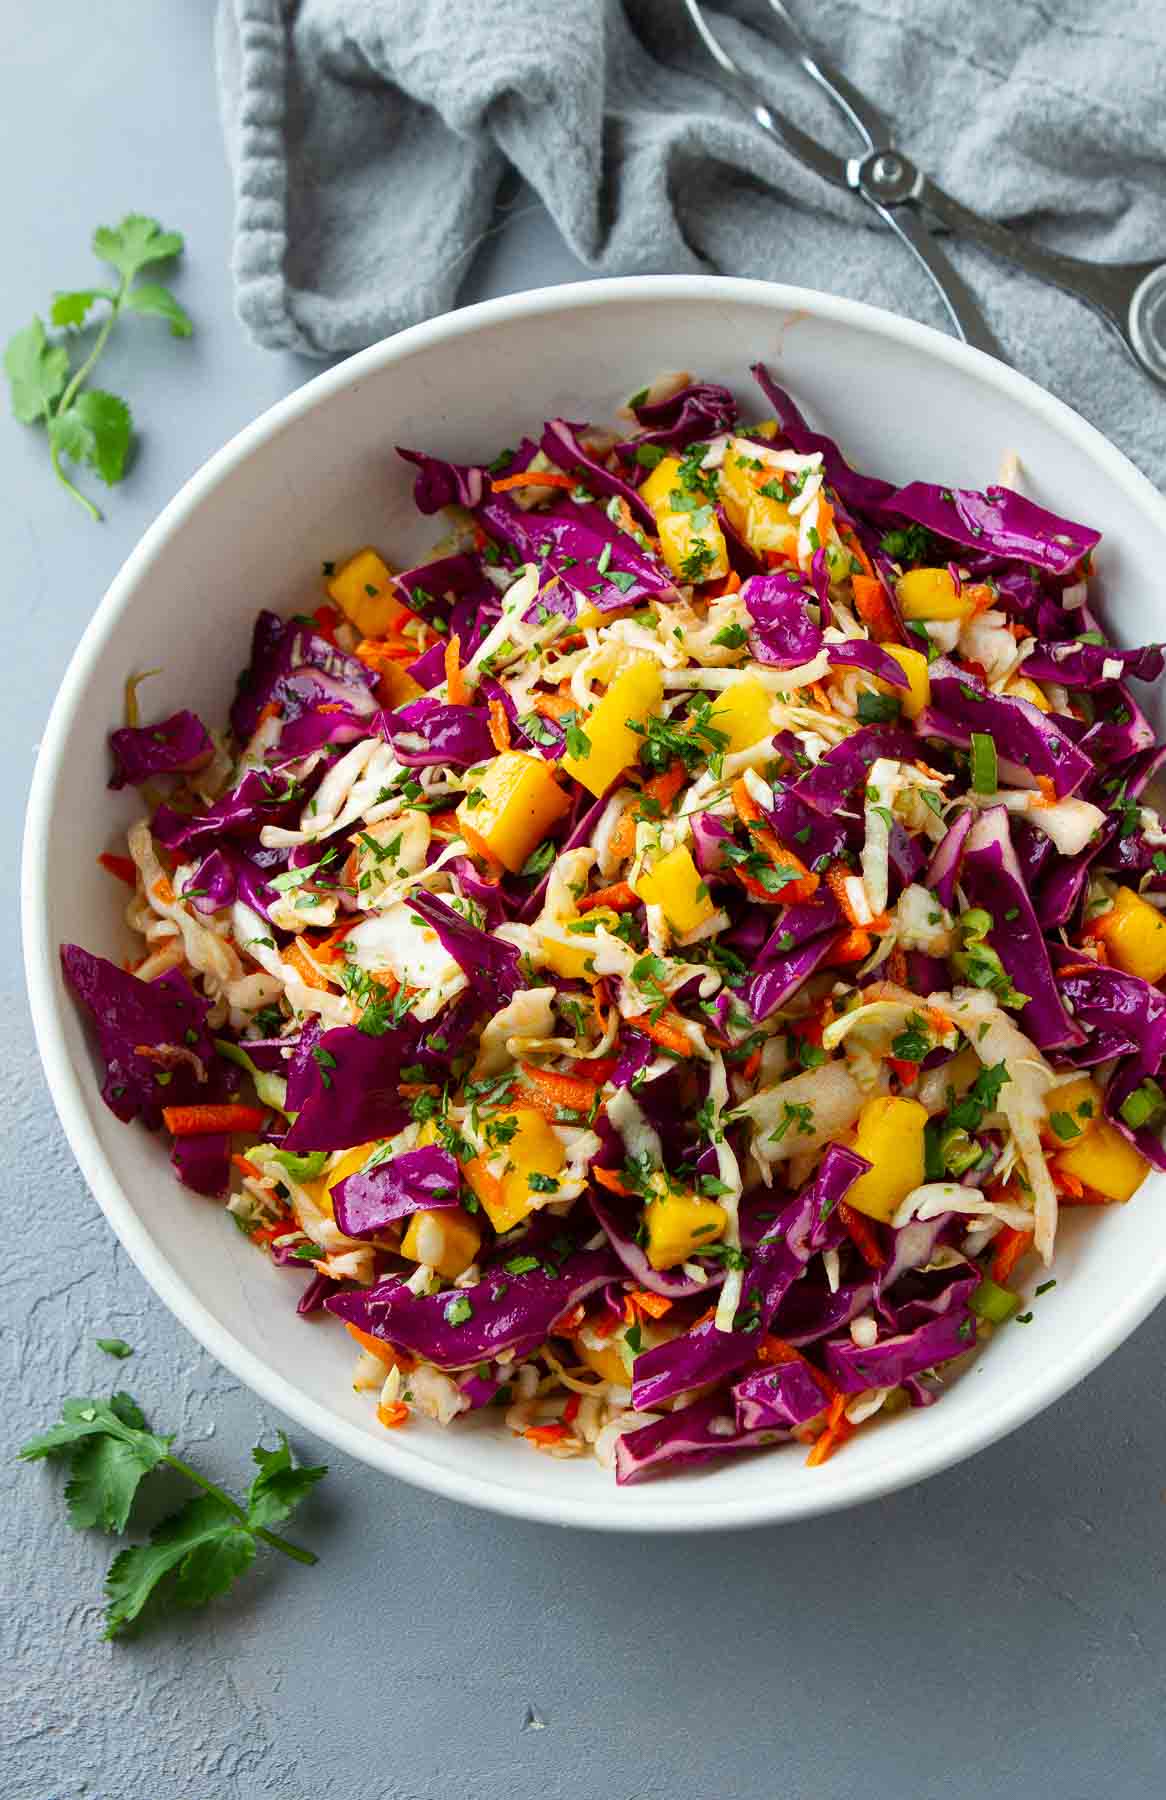 Green and purple cabbage slaw with mango in a glass bowl.